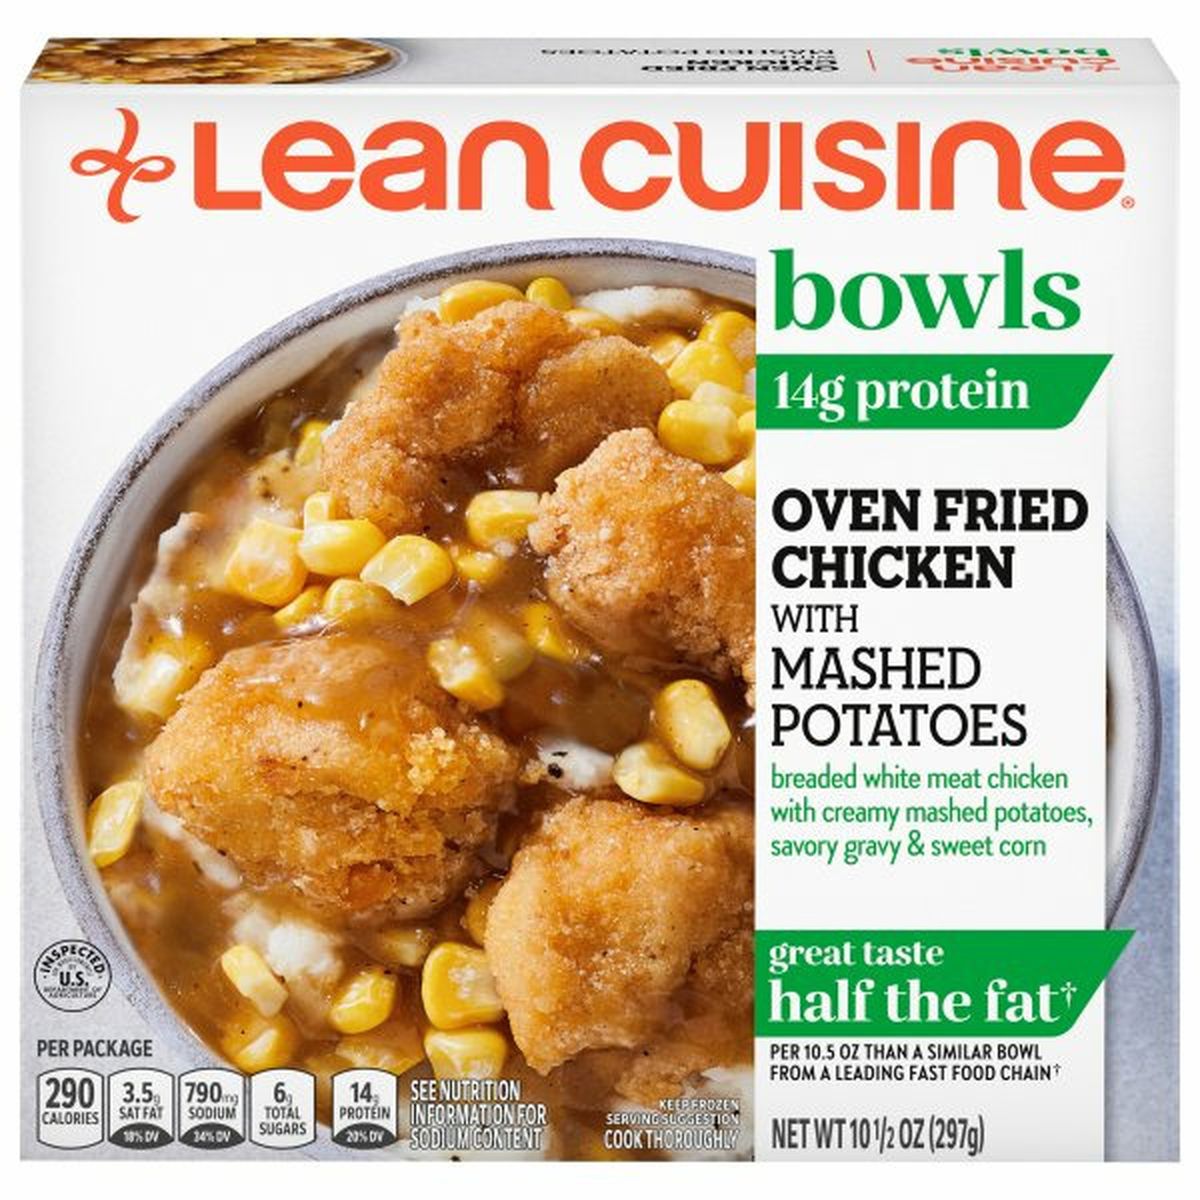 Calories in Lean Cuisine Bowls, Oven Fried Chicken with Mashed Potatoes